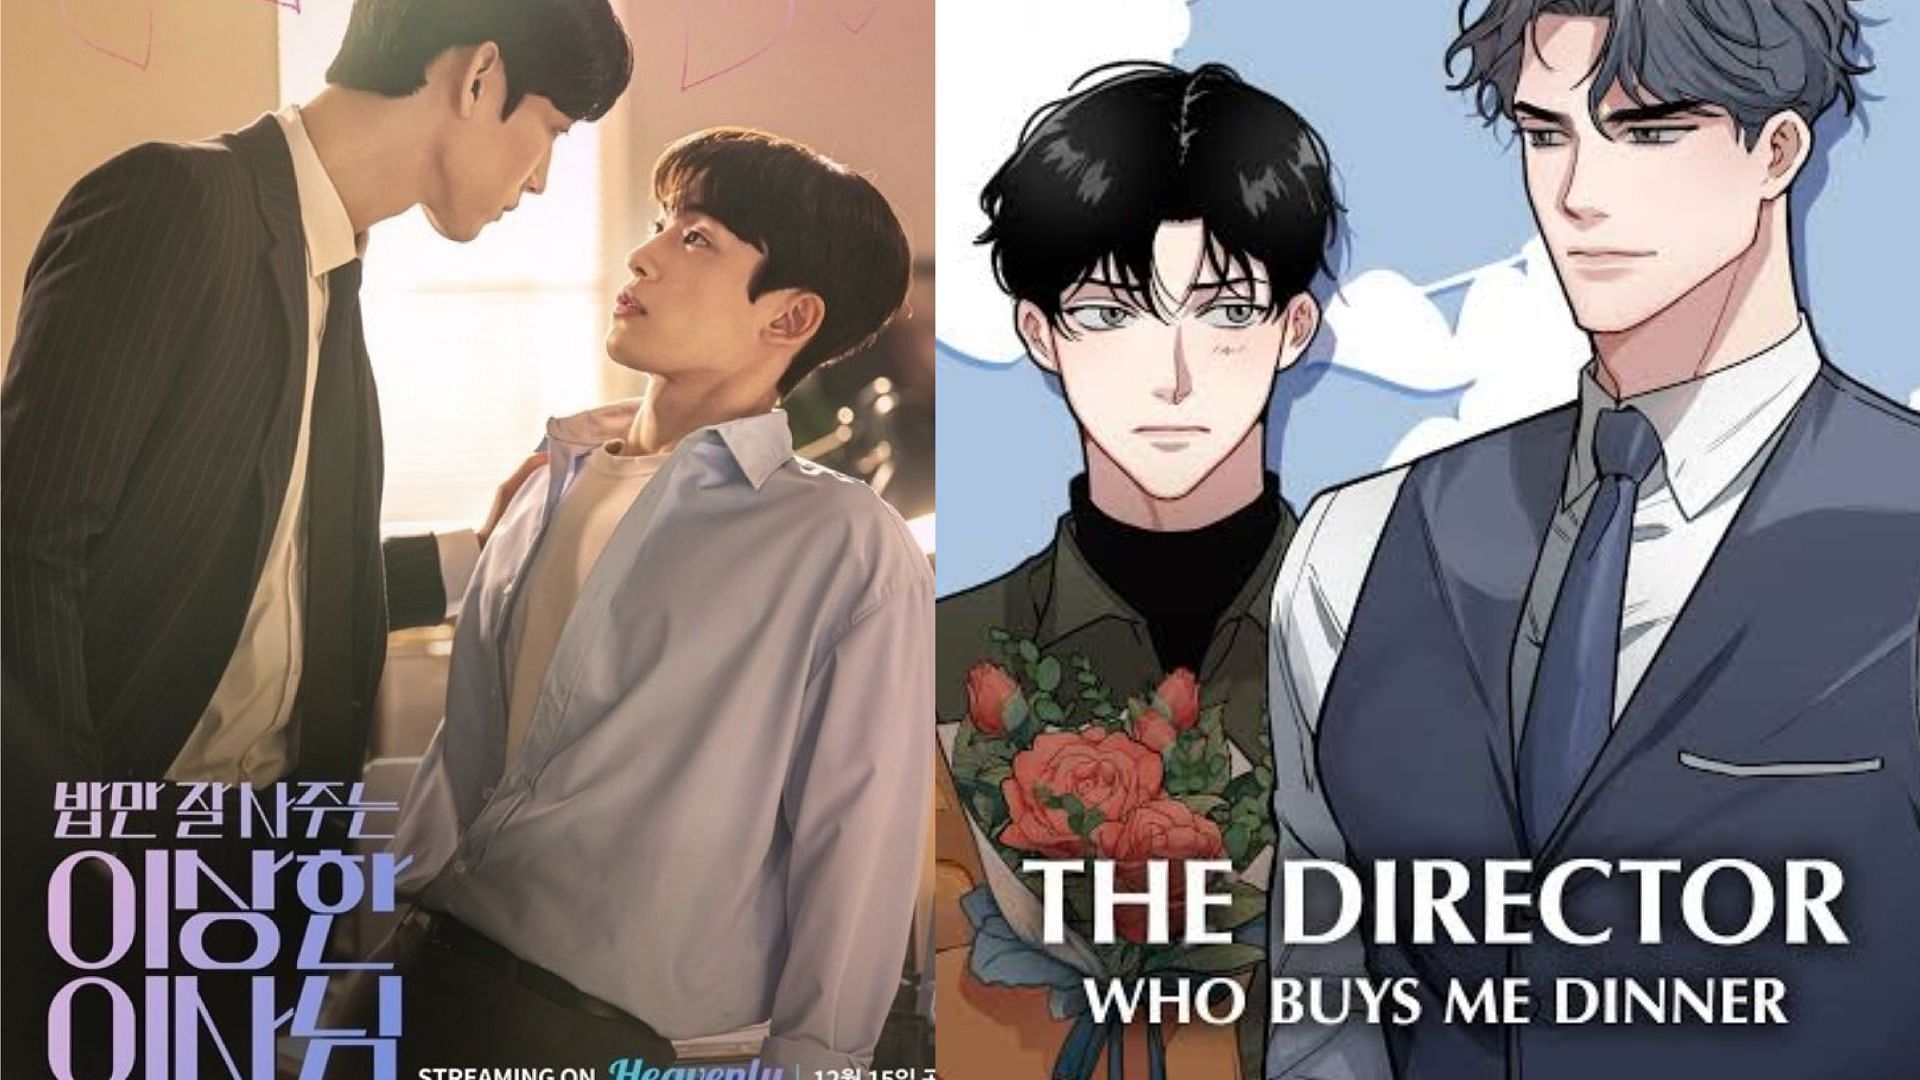 Official drama and Webtoon poster for The Director Who Buys Me Dinner (Images via Twitter/Kmagazinemx)